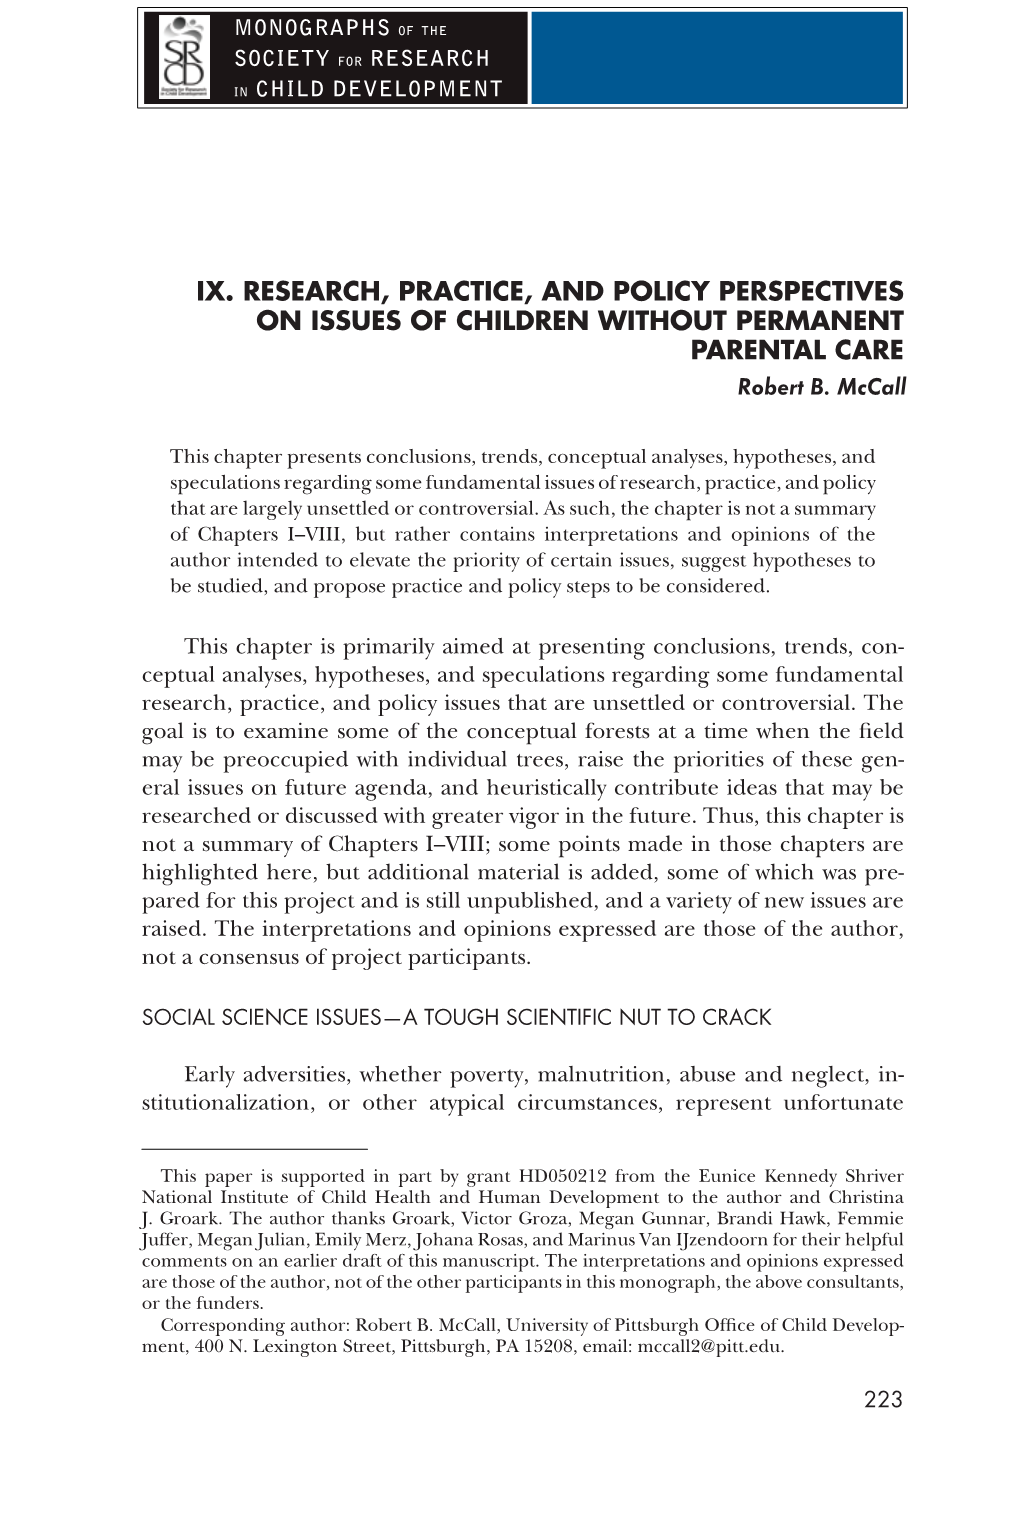 IX. RESEARCH, PRACTICE, and POLICY PERSPECTIVES on ISSUES of CHILDREN WITHOUT PERMANENT PARENTAL CARE Robert B